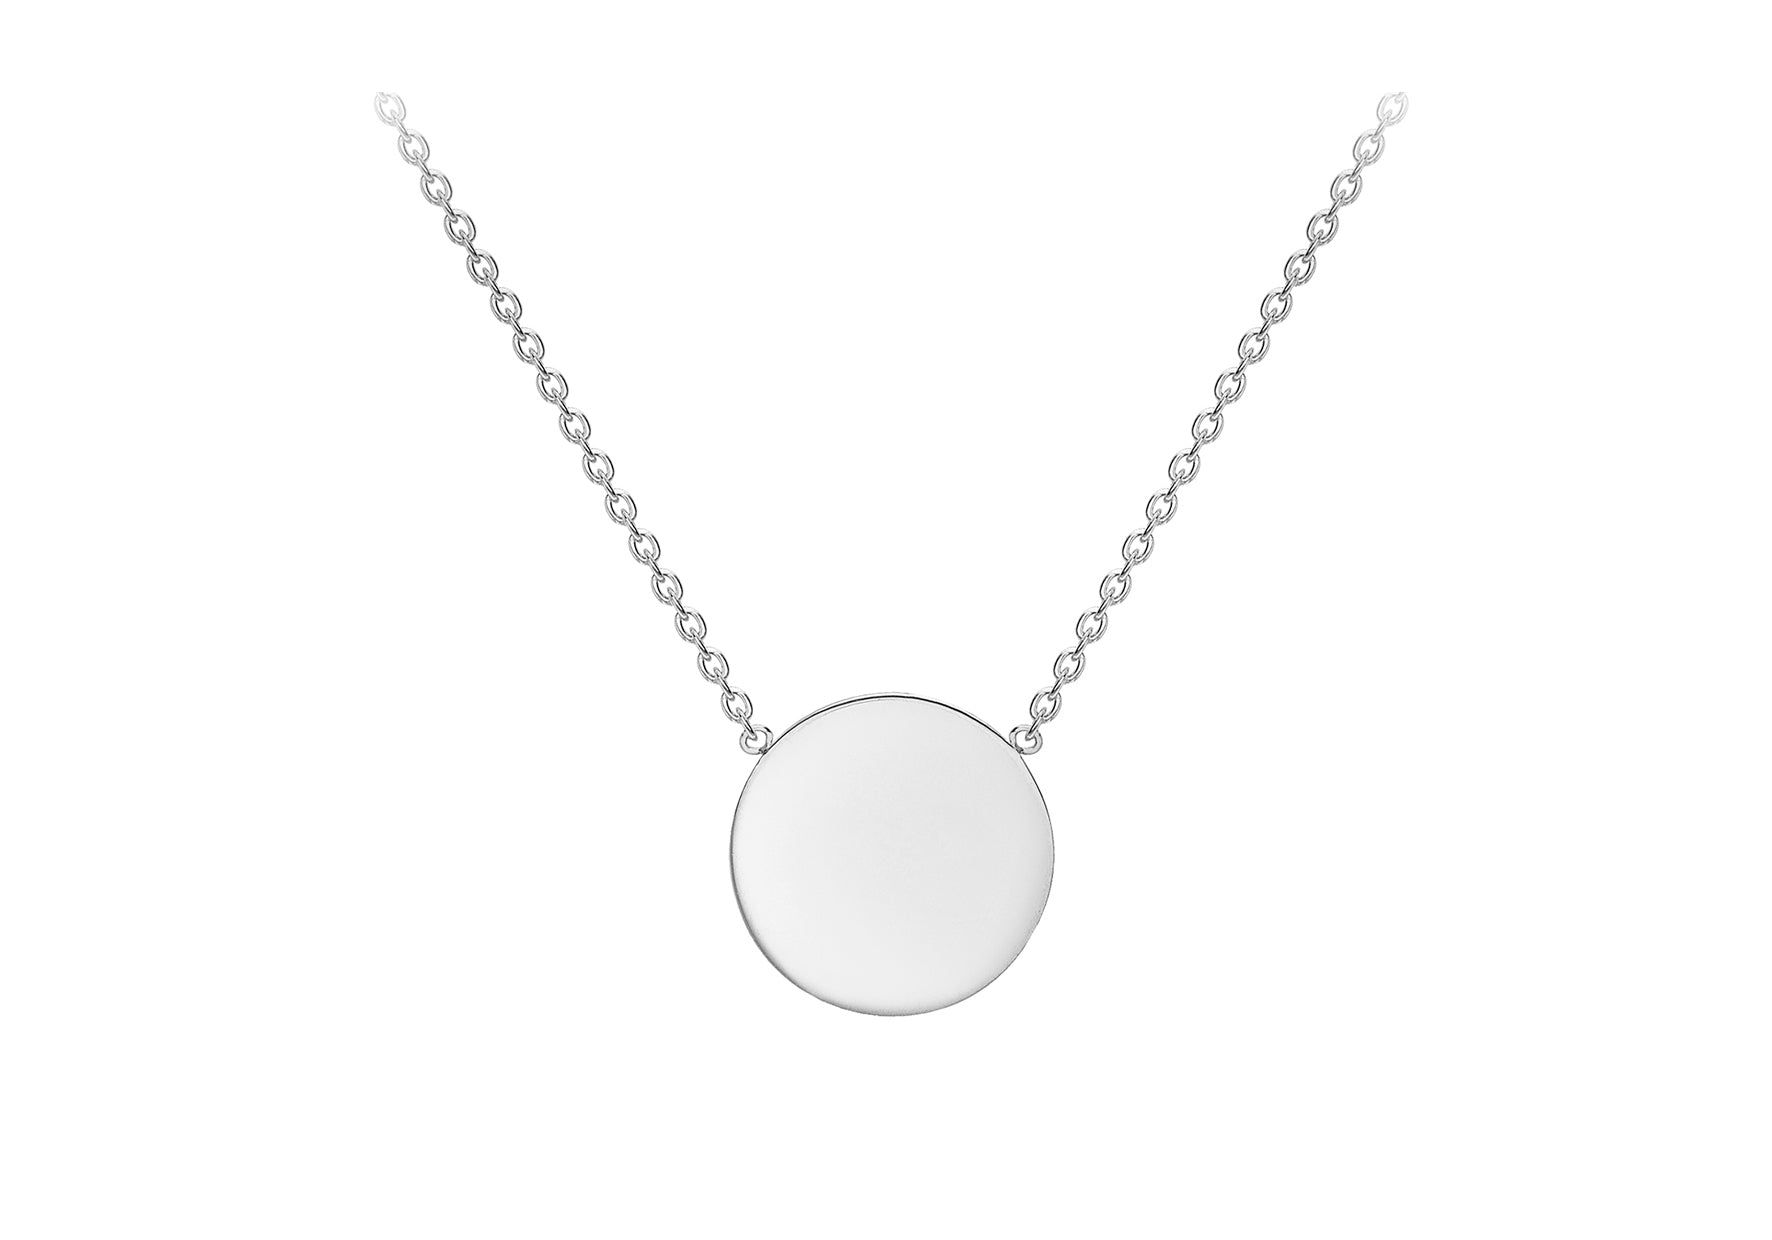 9ct White Gold plain disc with chain